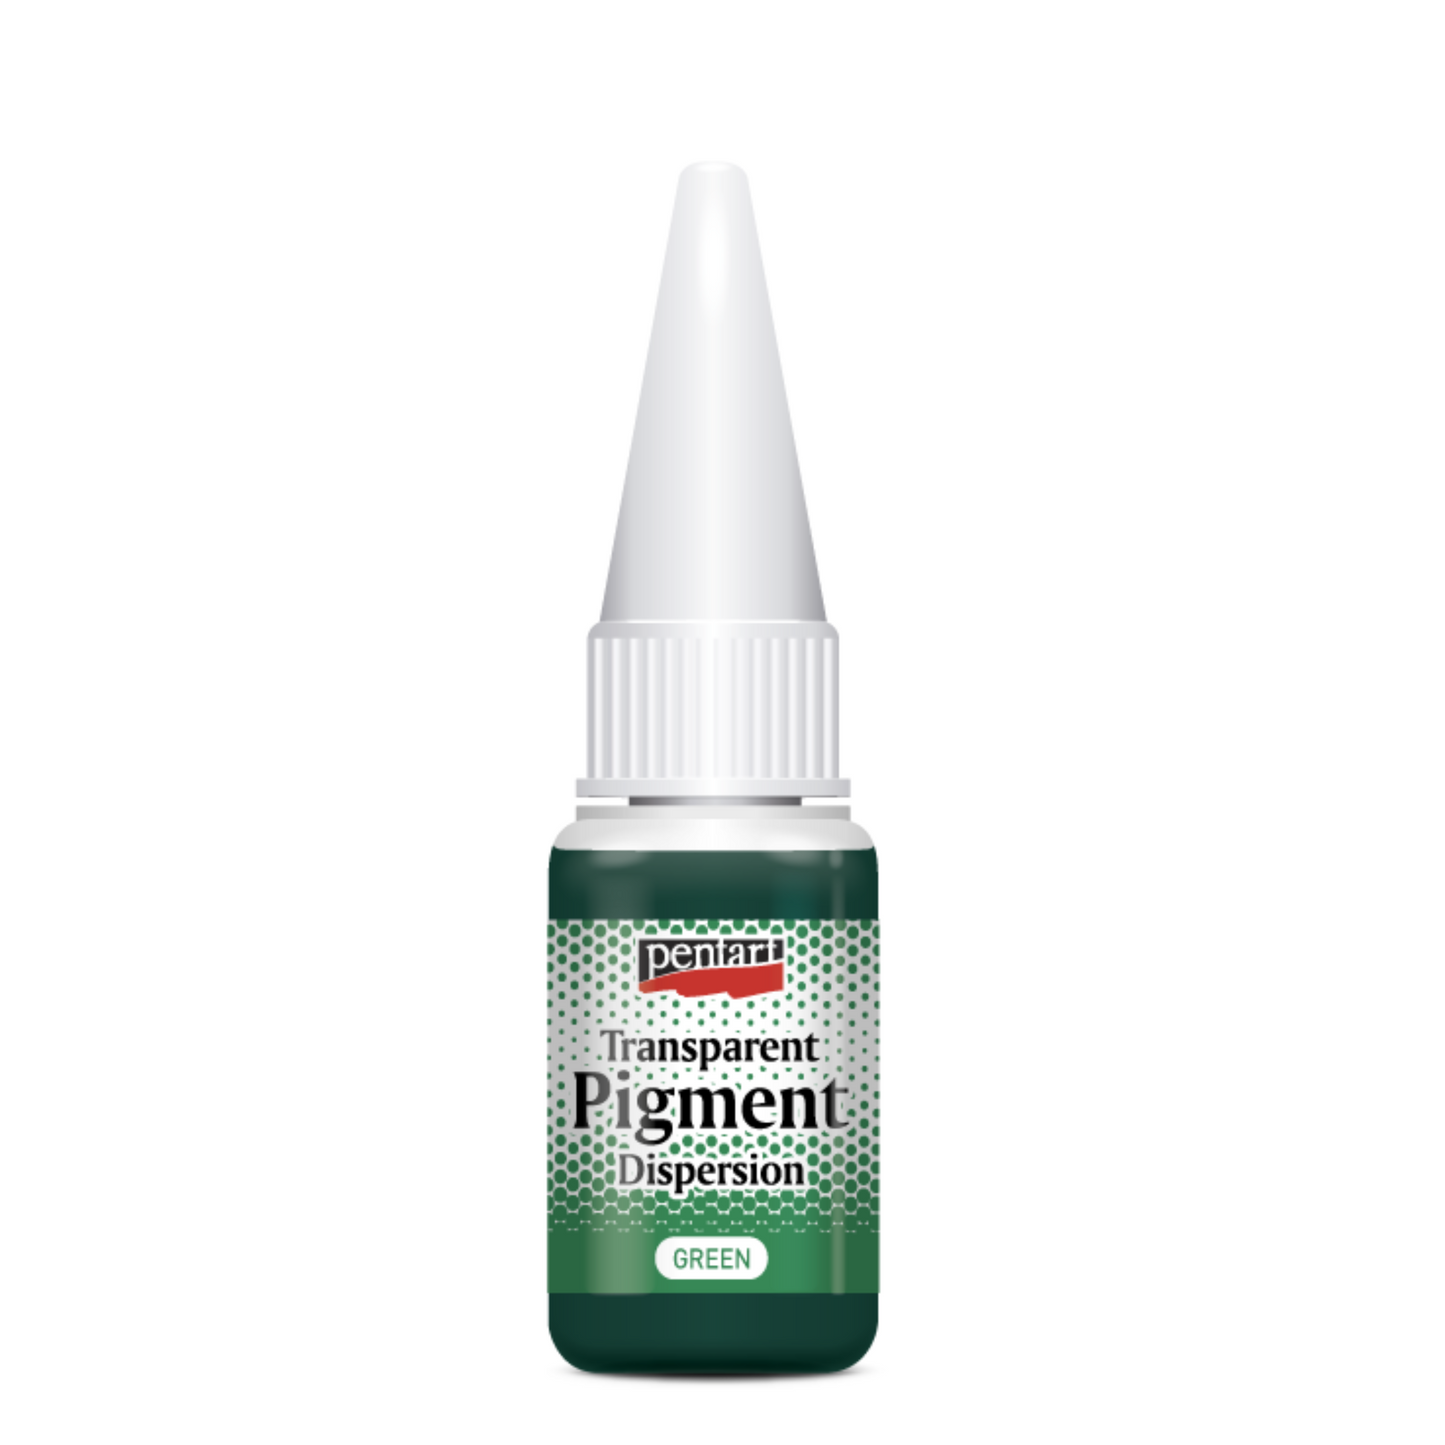 Transparent Pigment Dispersion in Green by Pentart available at Milton's Daughter.